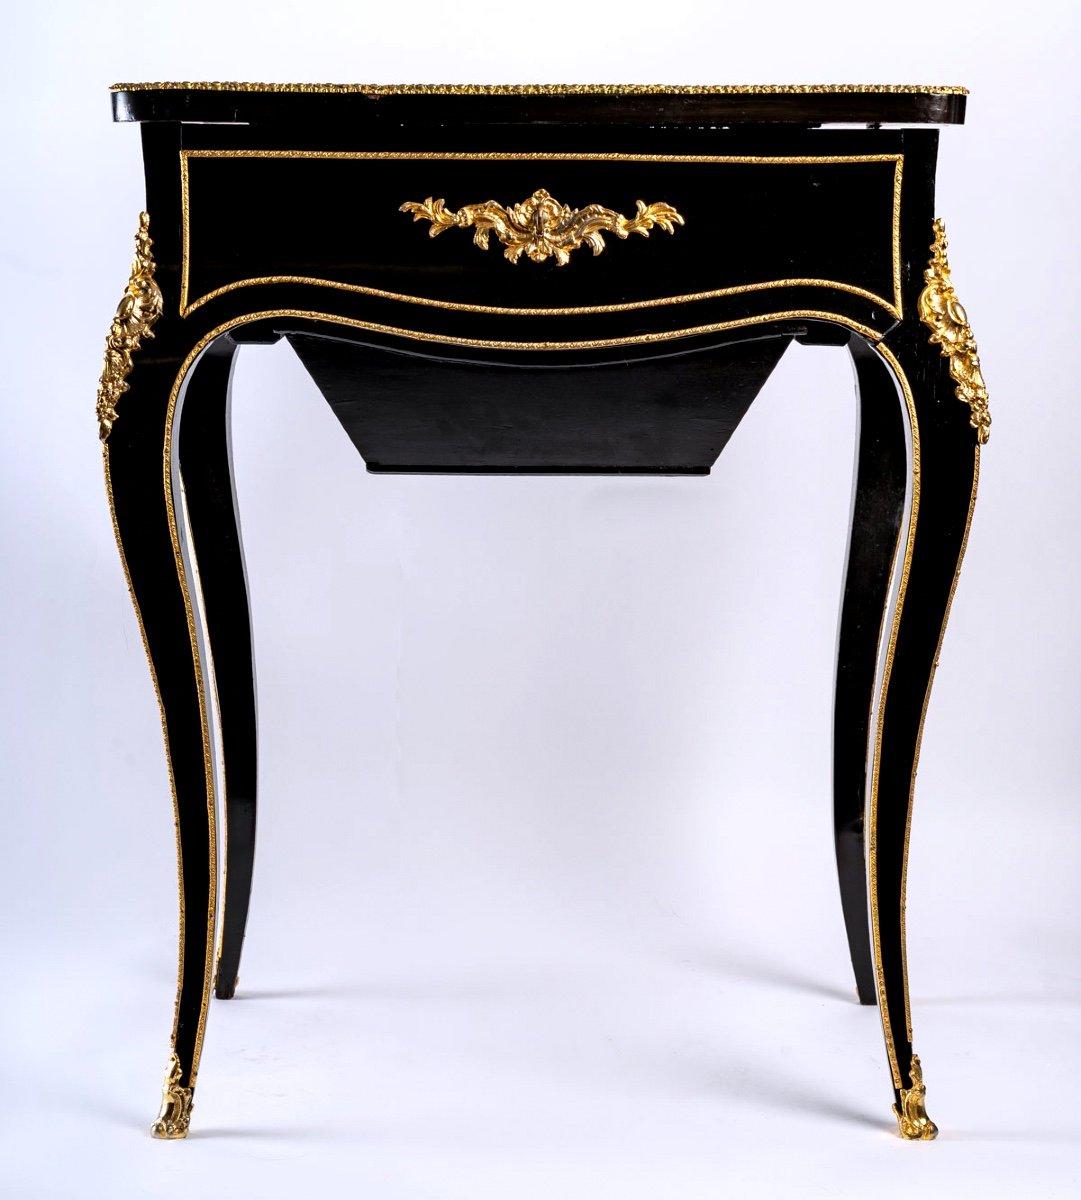 In the 19th century, under the reign of Napoleon III (1852/1870) in particular, marquetry was rediscovered.
We copy the styles of previous centuries; so we make a lot of Boulle style furniture.
The richness and the quality of the materials are the